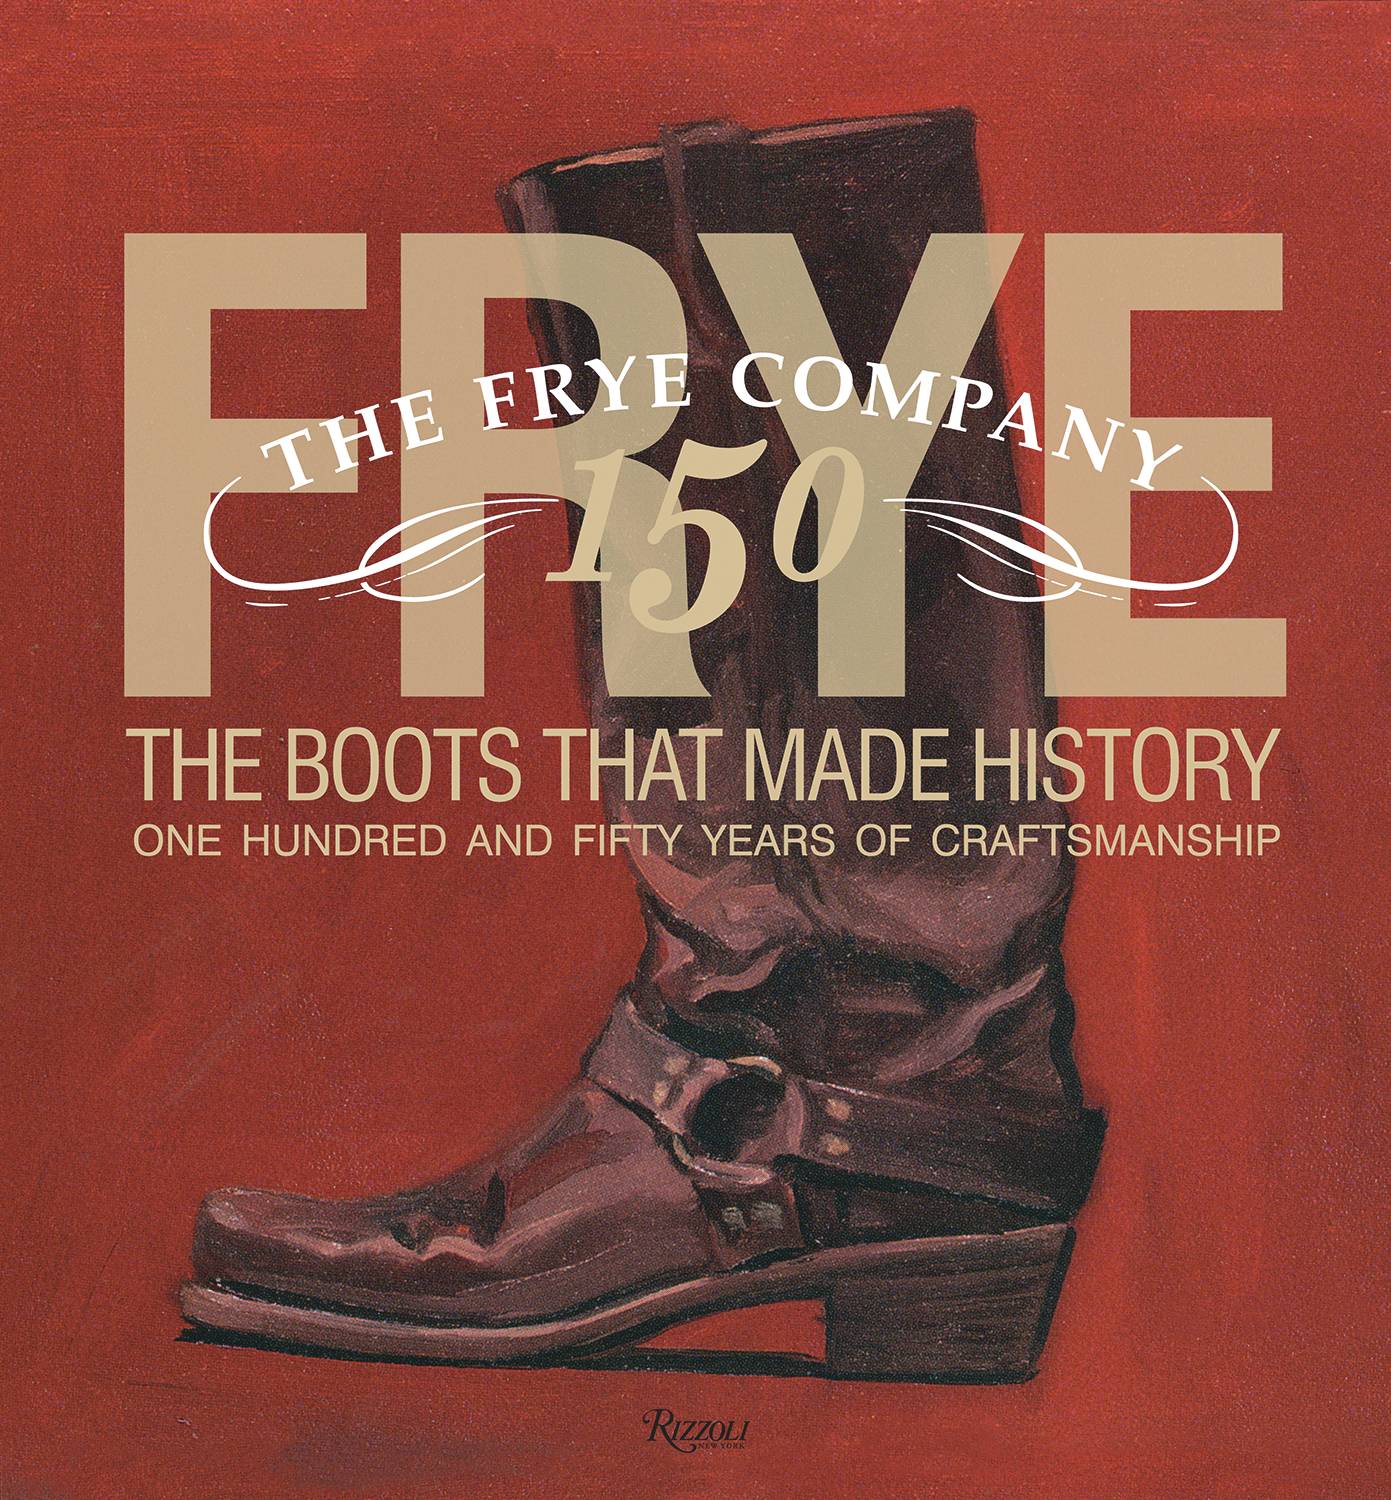 Rizzoli Frye The Boots That Made History book